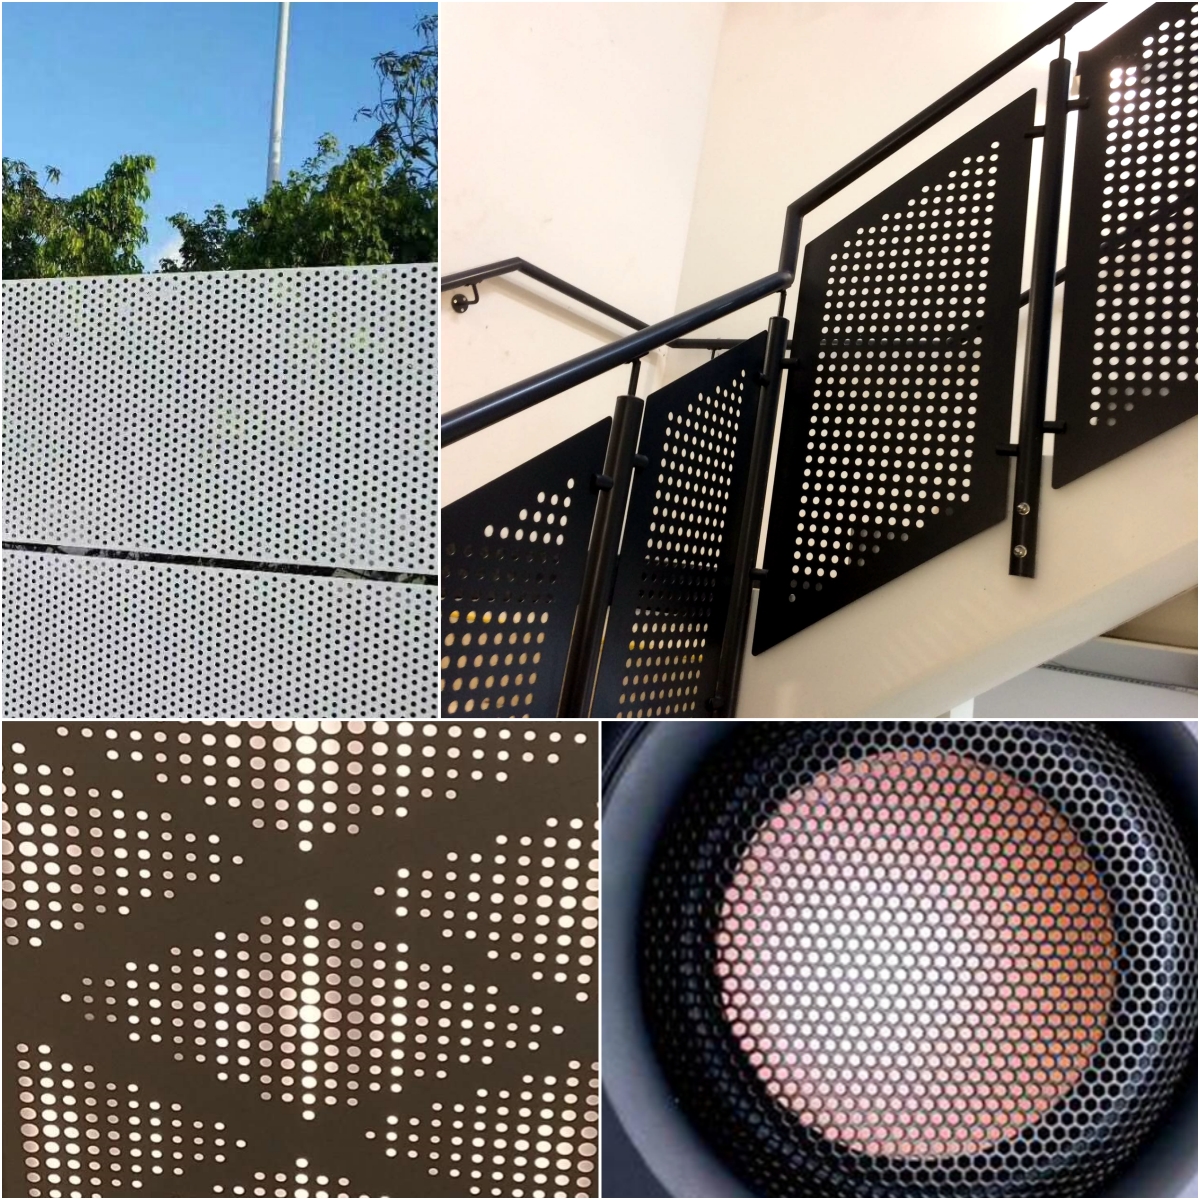 A wide range of metal perforated mesh